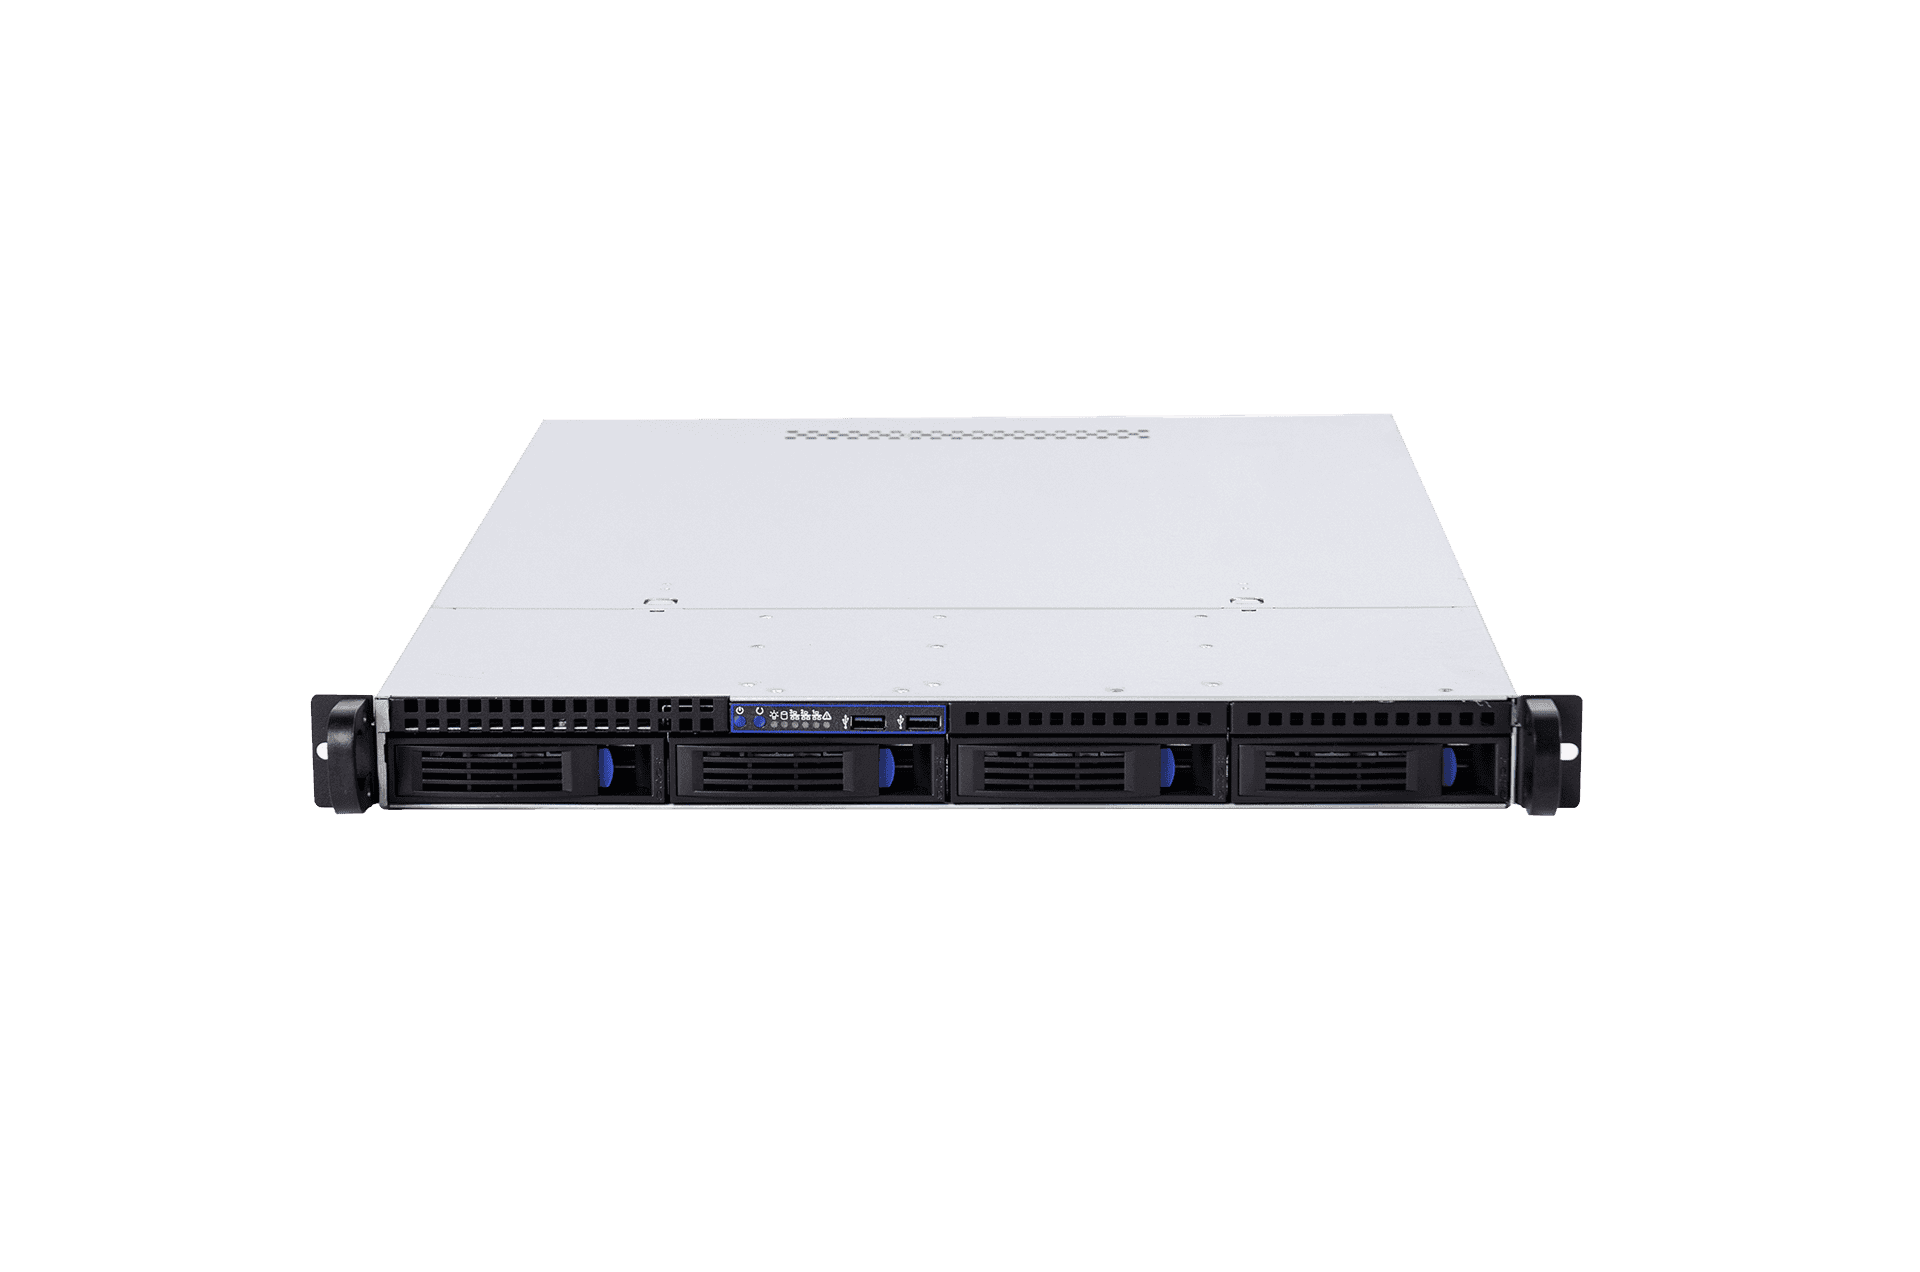 Server Chassis 1U 4 hard drive bays Hot-Swap for motherboard size up to 12"x13" backplane with optional MiniSAS-8087/8643/SATA interface